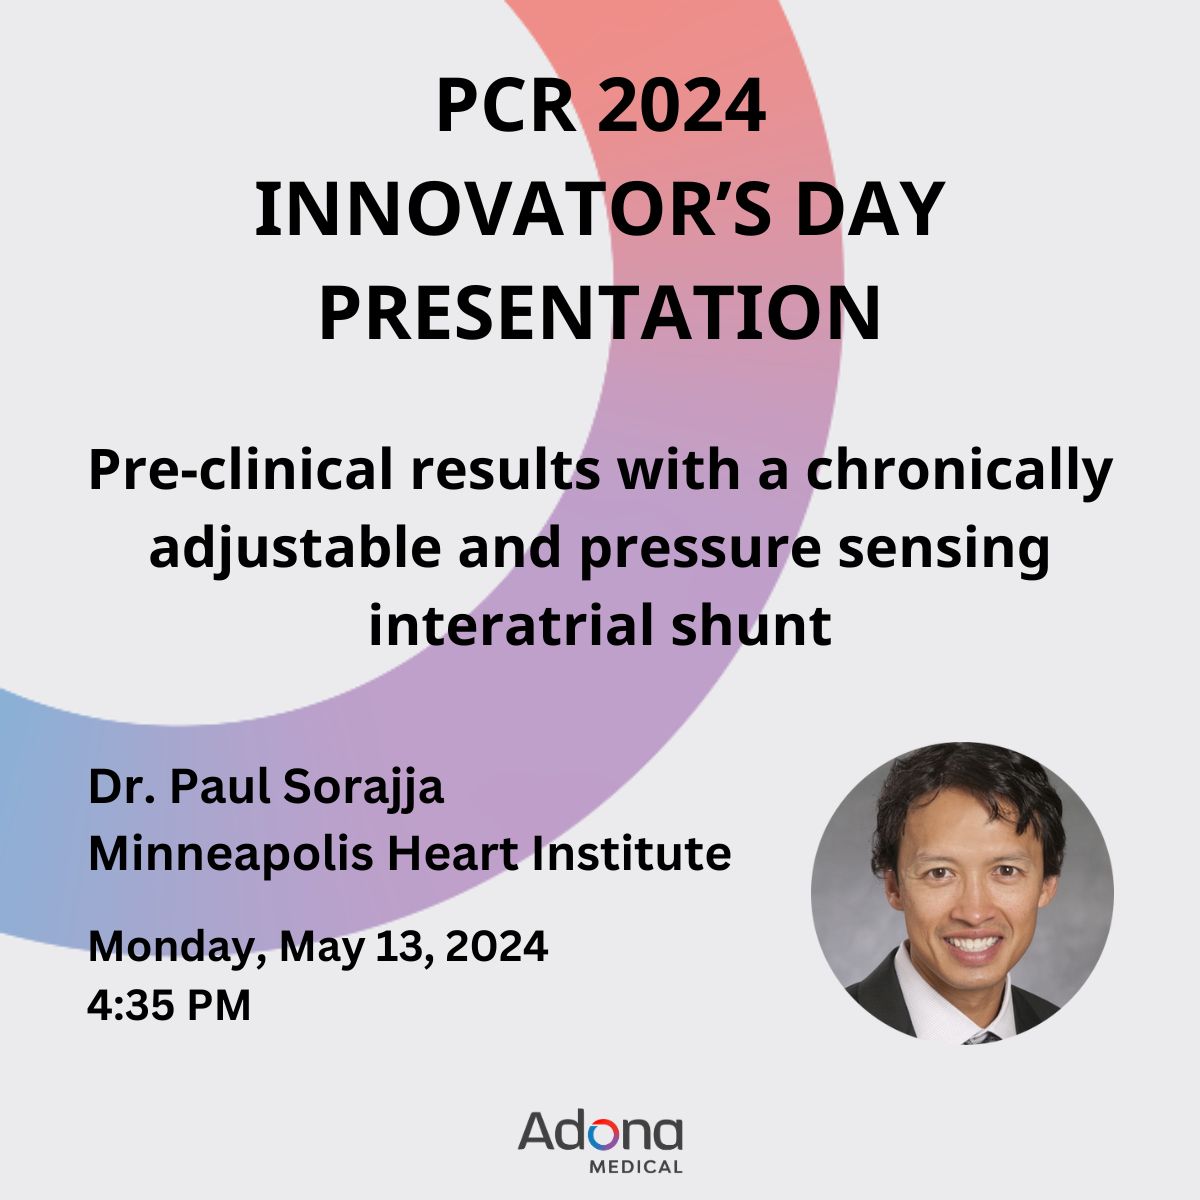 We're excited to make our #EuroPCR debut next week! Dr. Paul Sorajja (@psorajja) will be presenting pre-clinical results with the Adona technology during Innovator's Day.